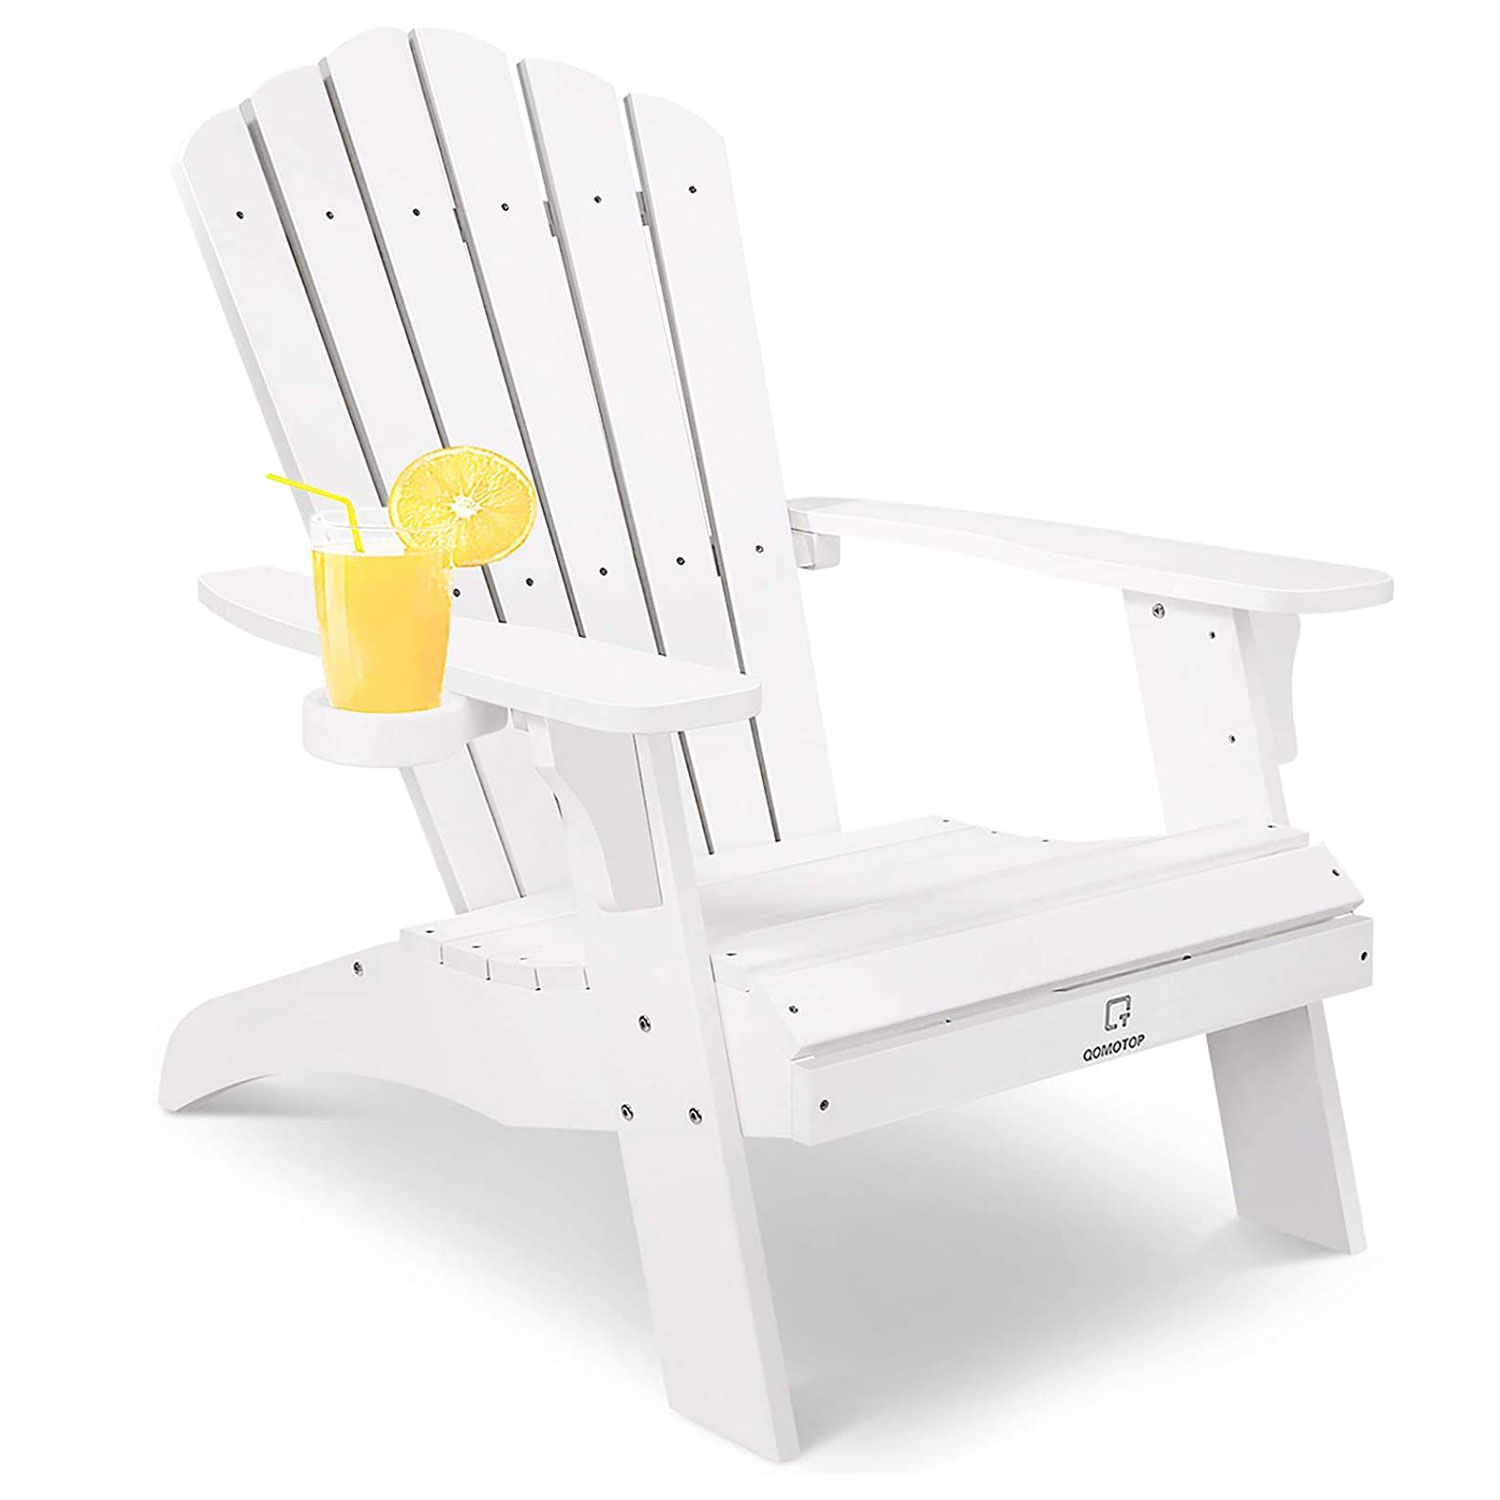 These Are The 11 Best Adirondack Chairs According To Reviews Better Homes Gardens